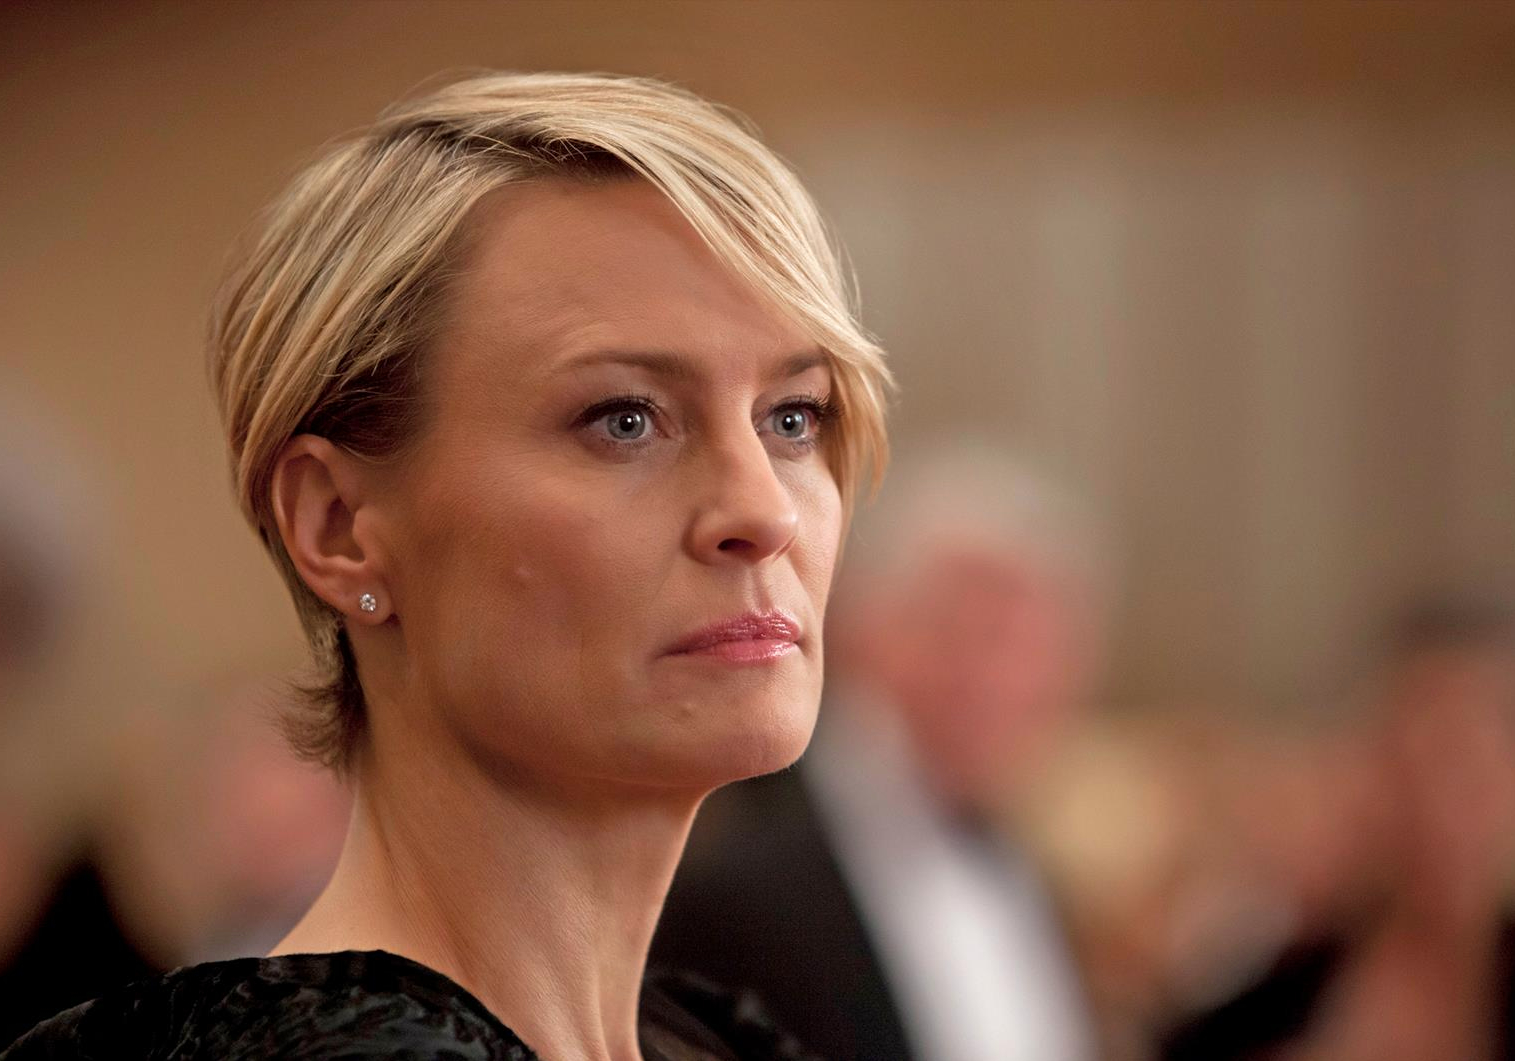 The Villainization of Claire Underwood on ‘House of Cards’